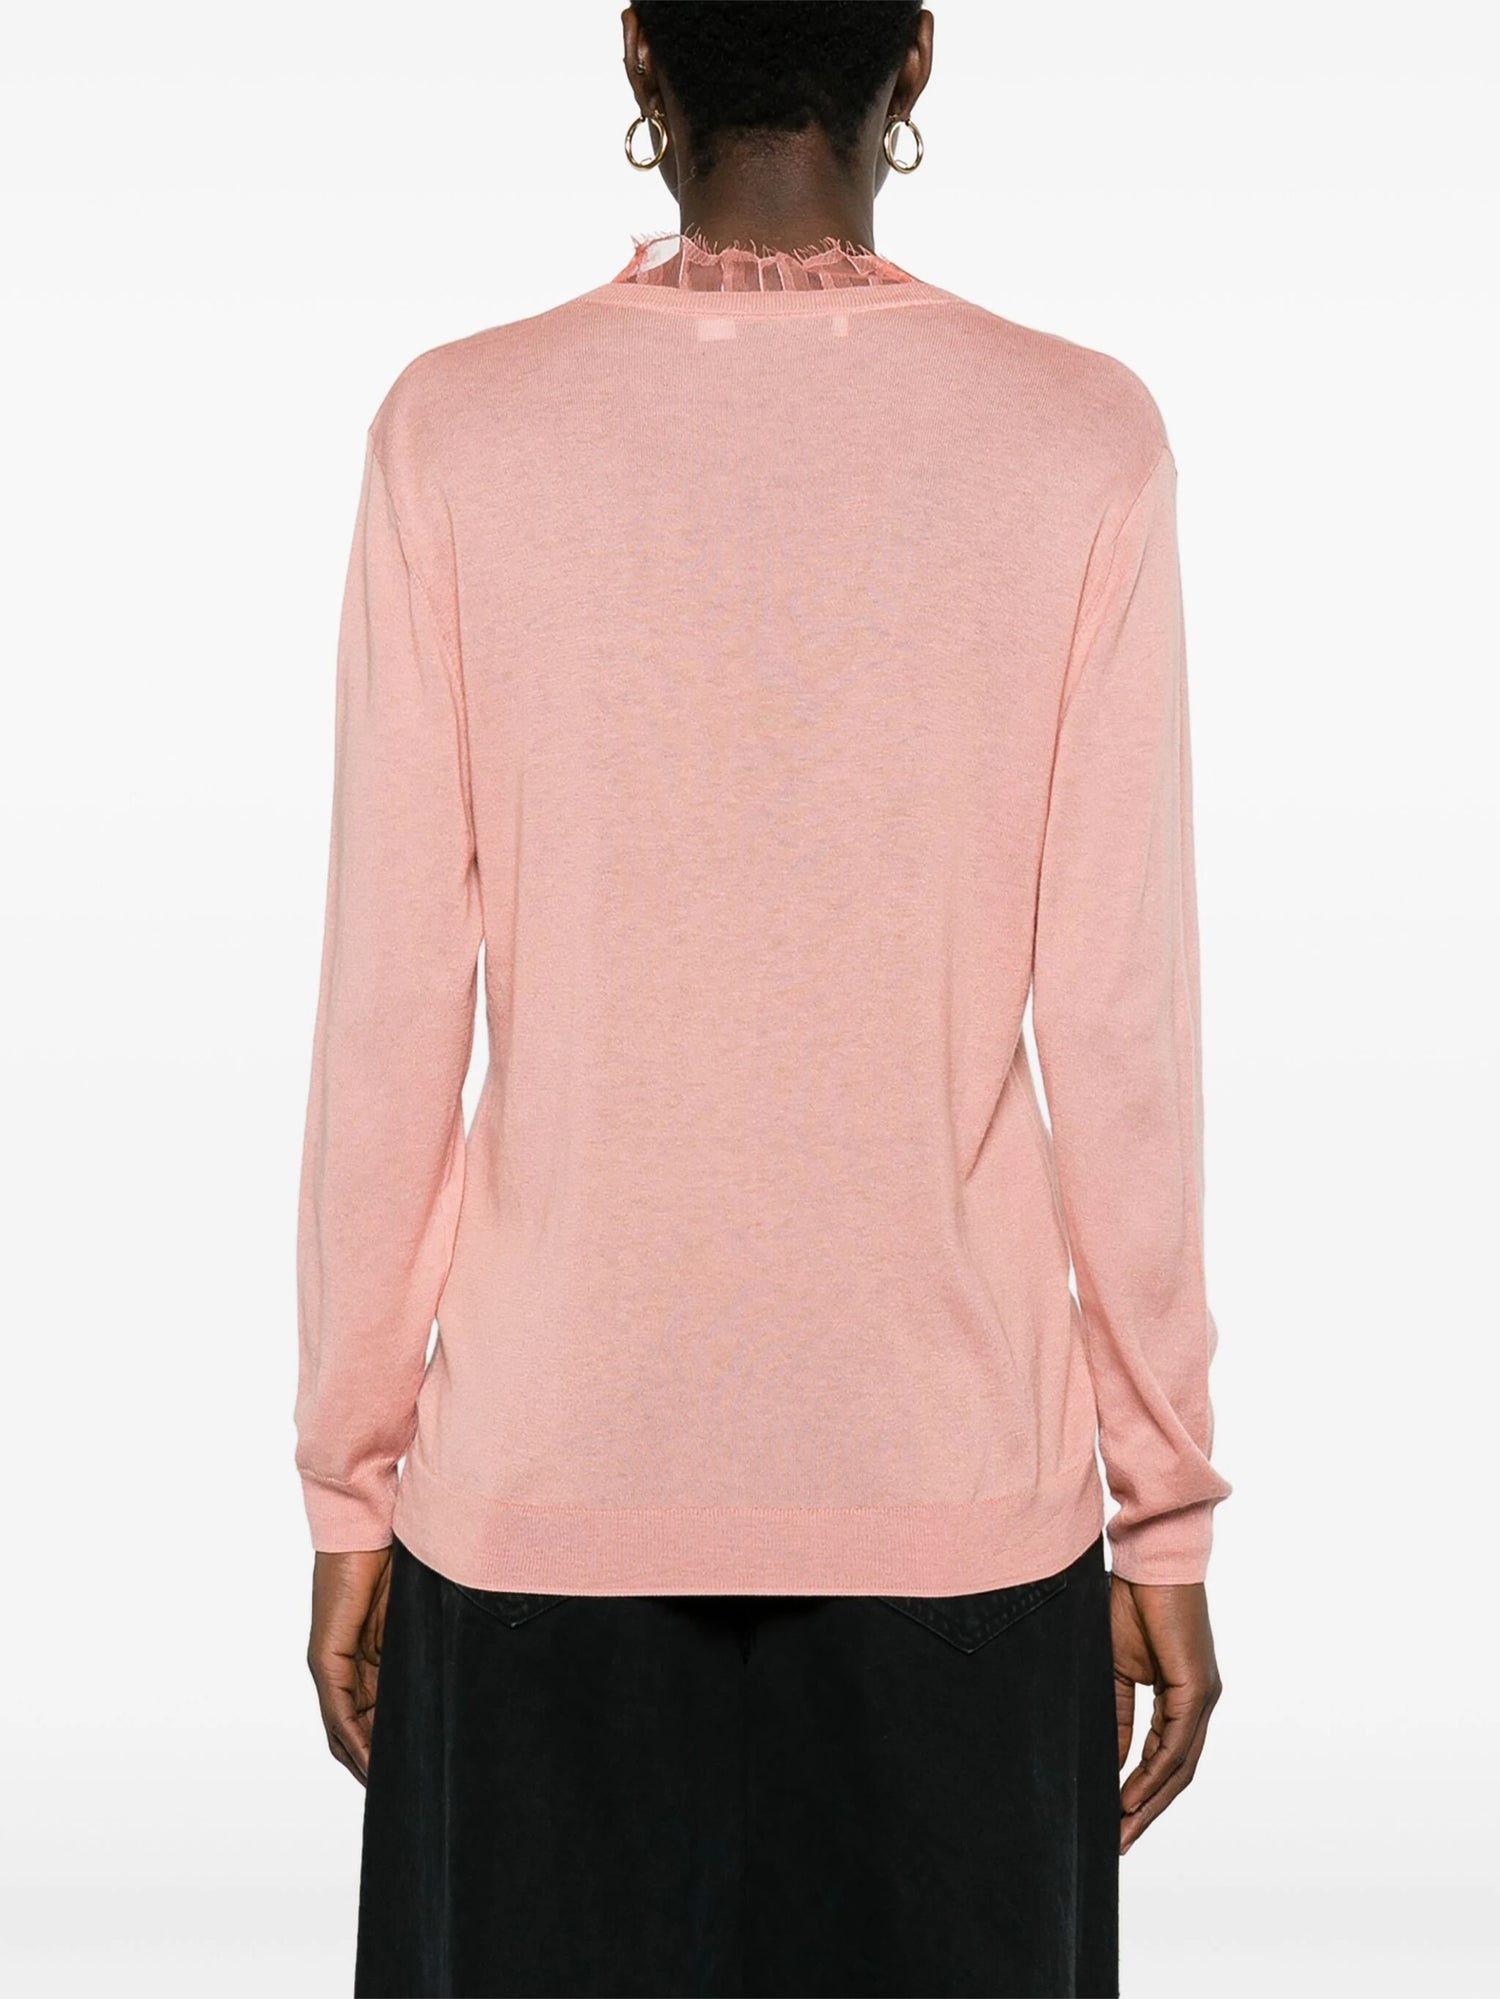 JAYDEN knitted sweater, coral pink